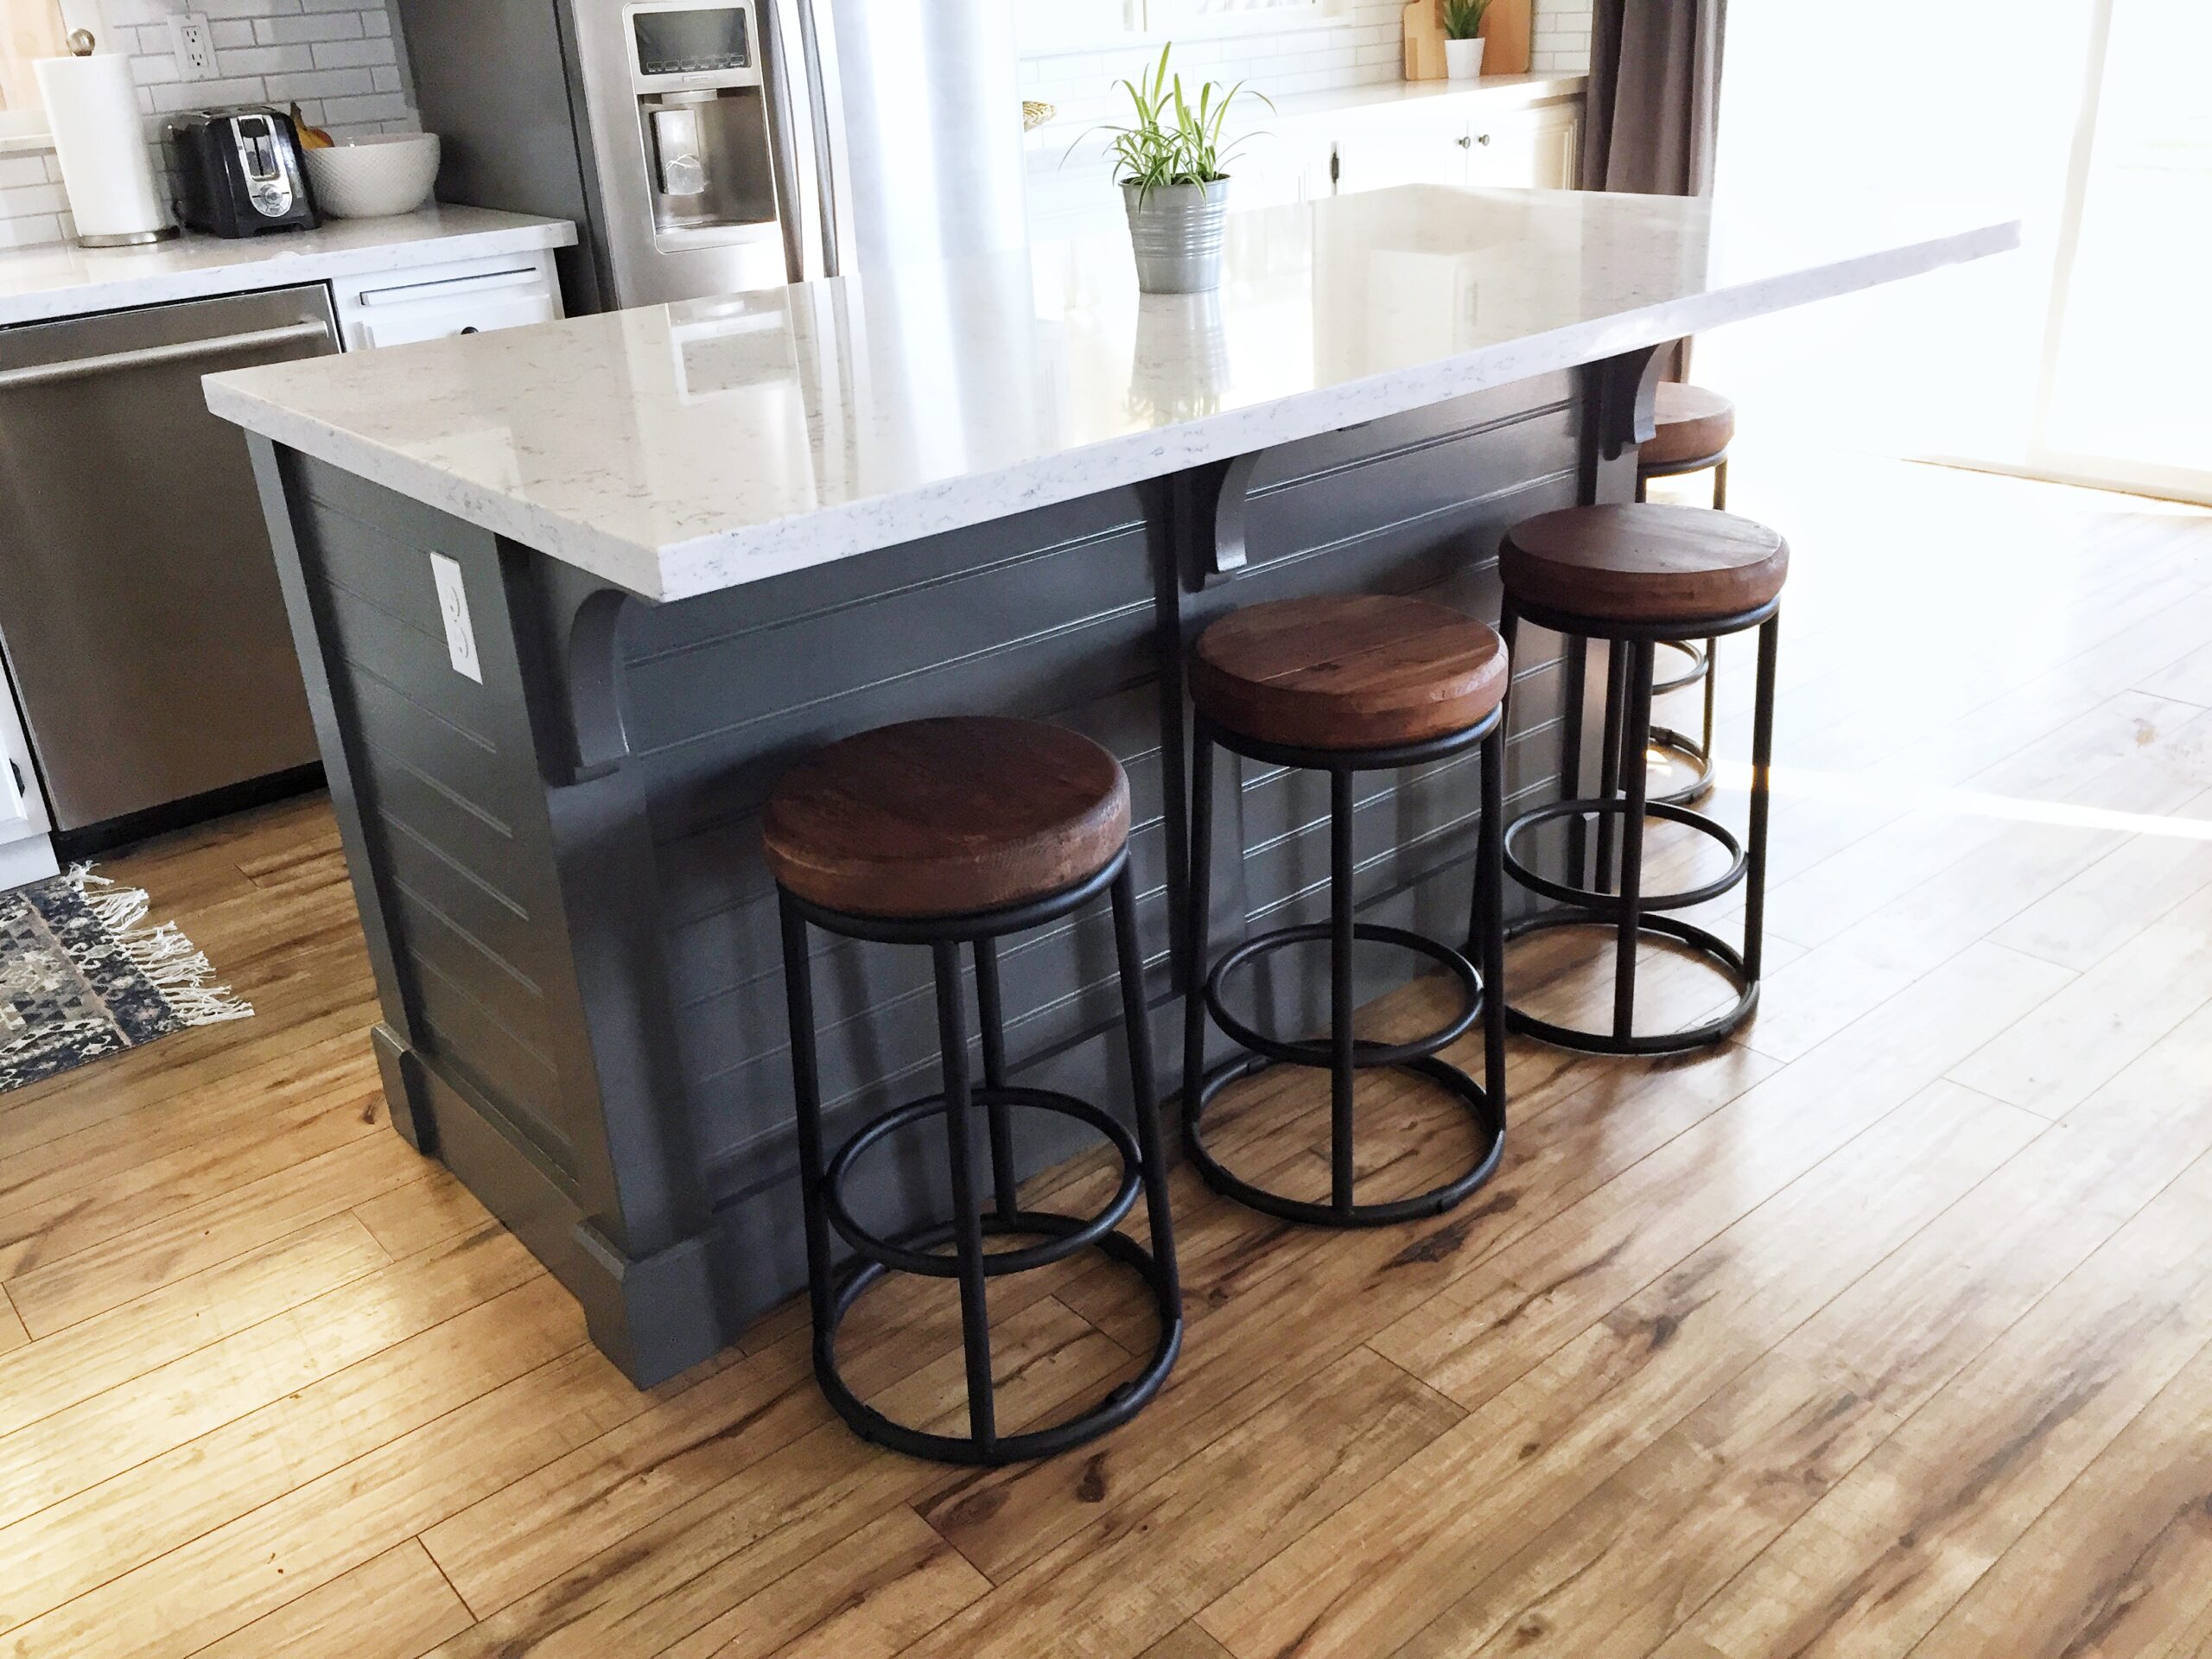 A Diy Kitchen Island Make It Yourself, Kitchen Cart With Bar Stools